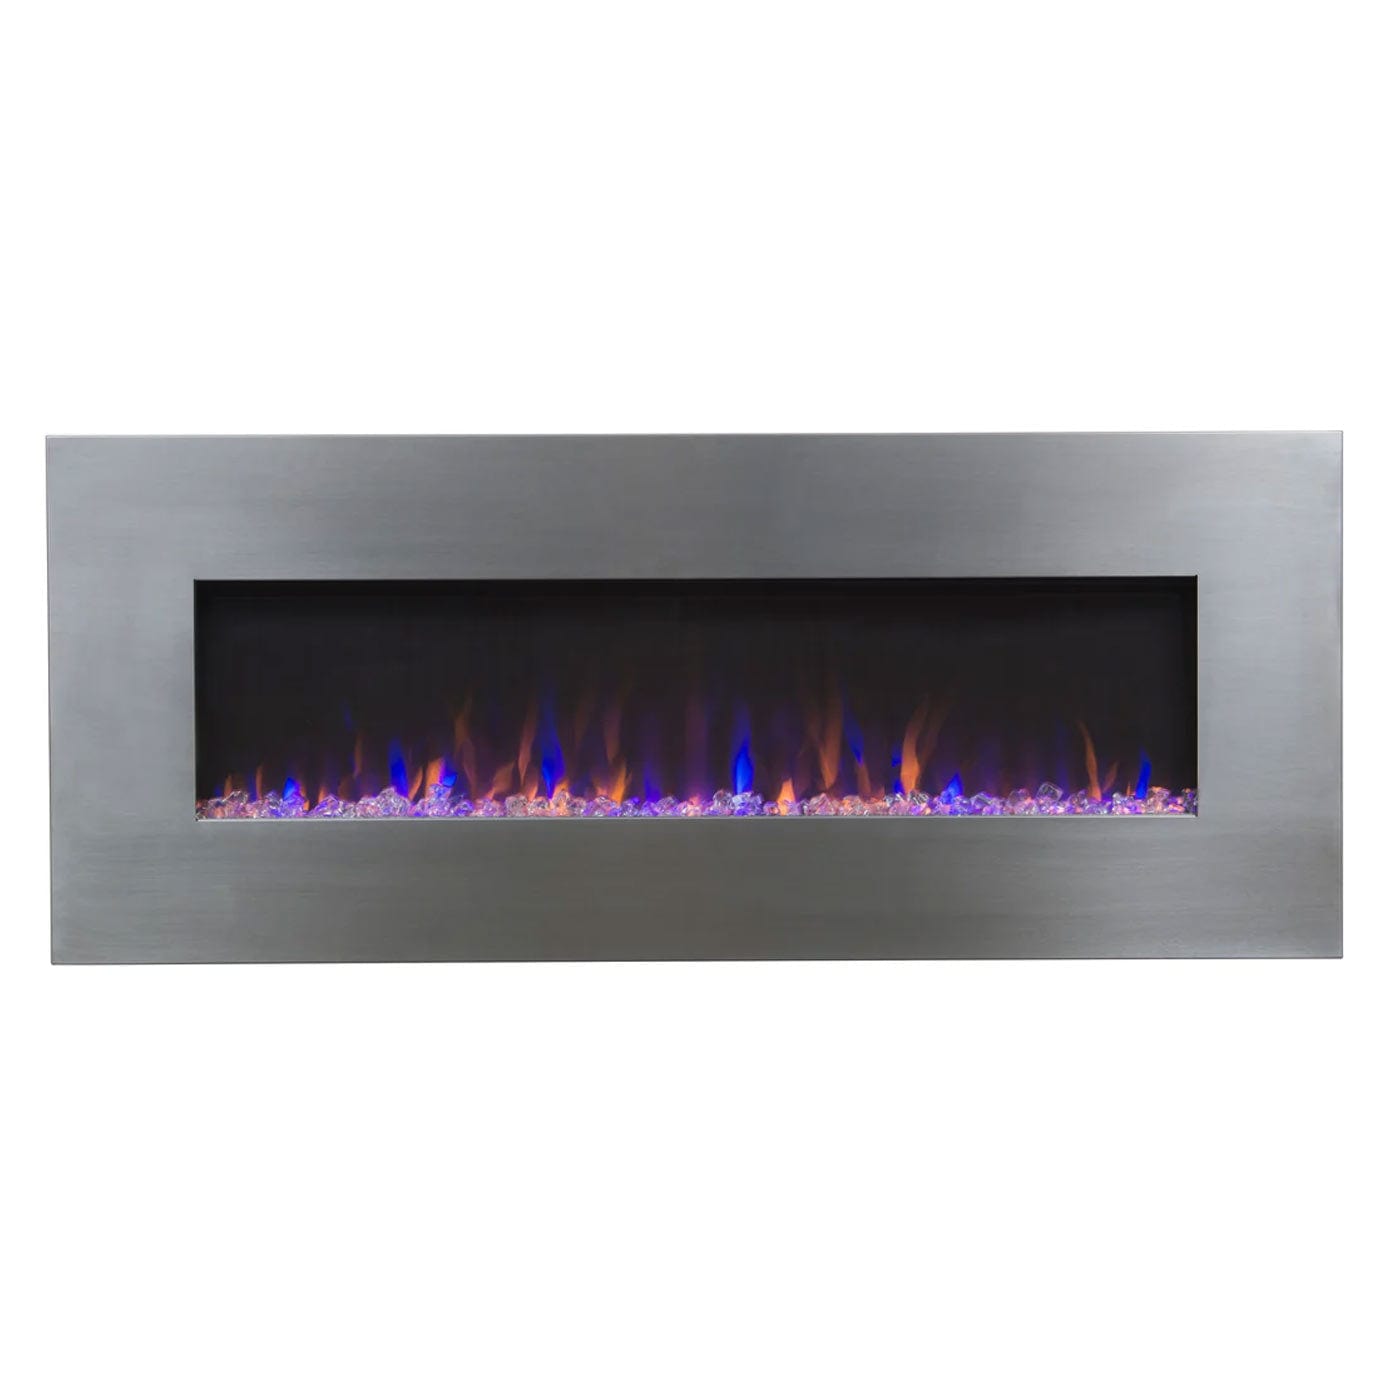 Touchstone 80024 AudioFlare Stainless 50 inch Recessed Electric Fireplace,  Colors and Bluetooth Audio – Touchstone Home Products, Inc.